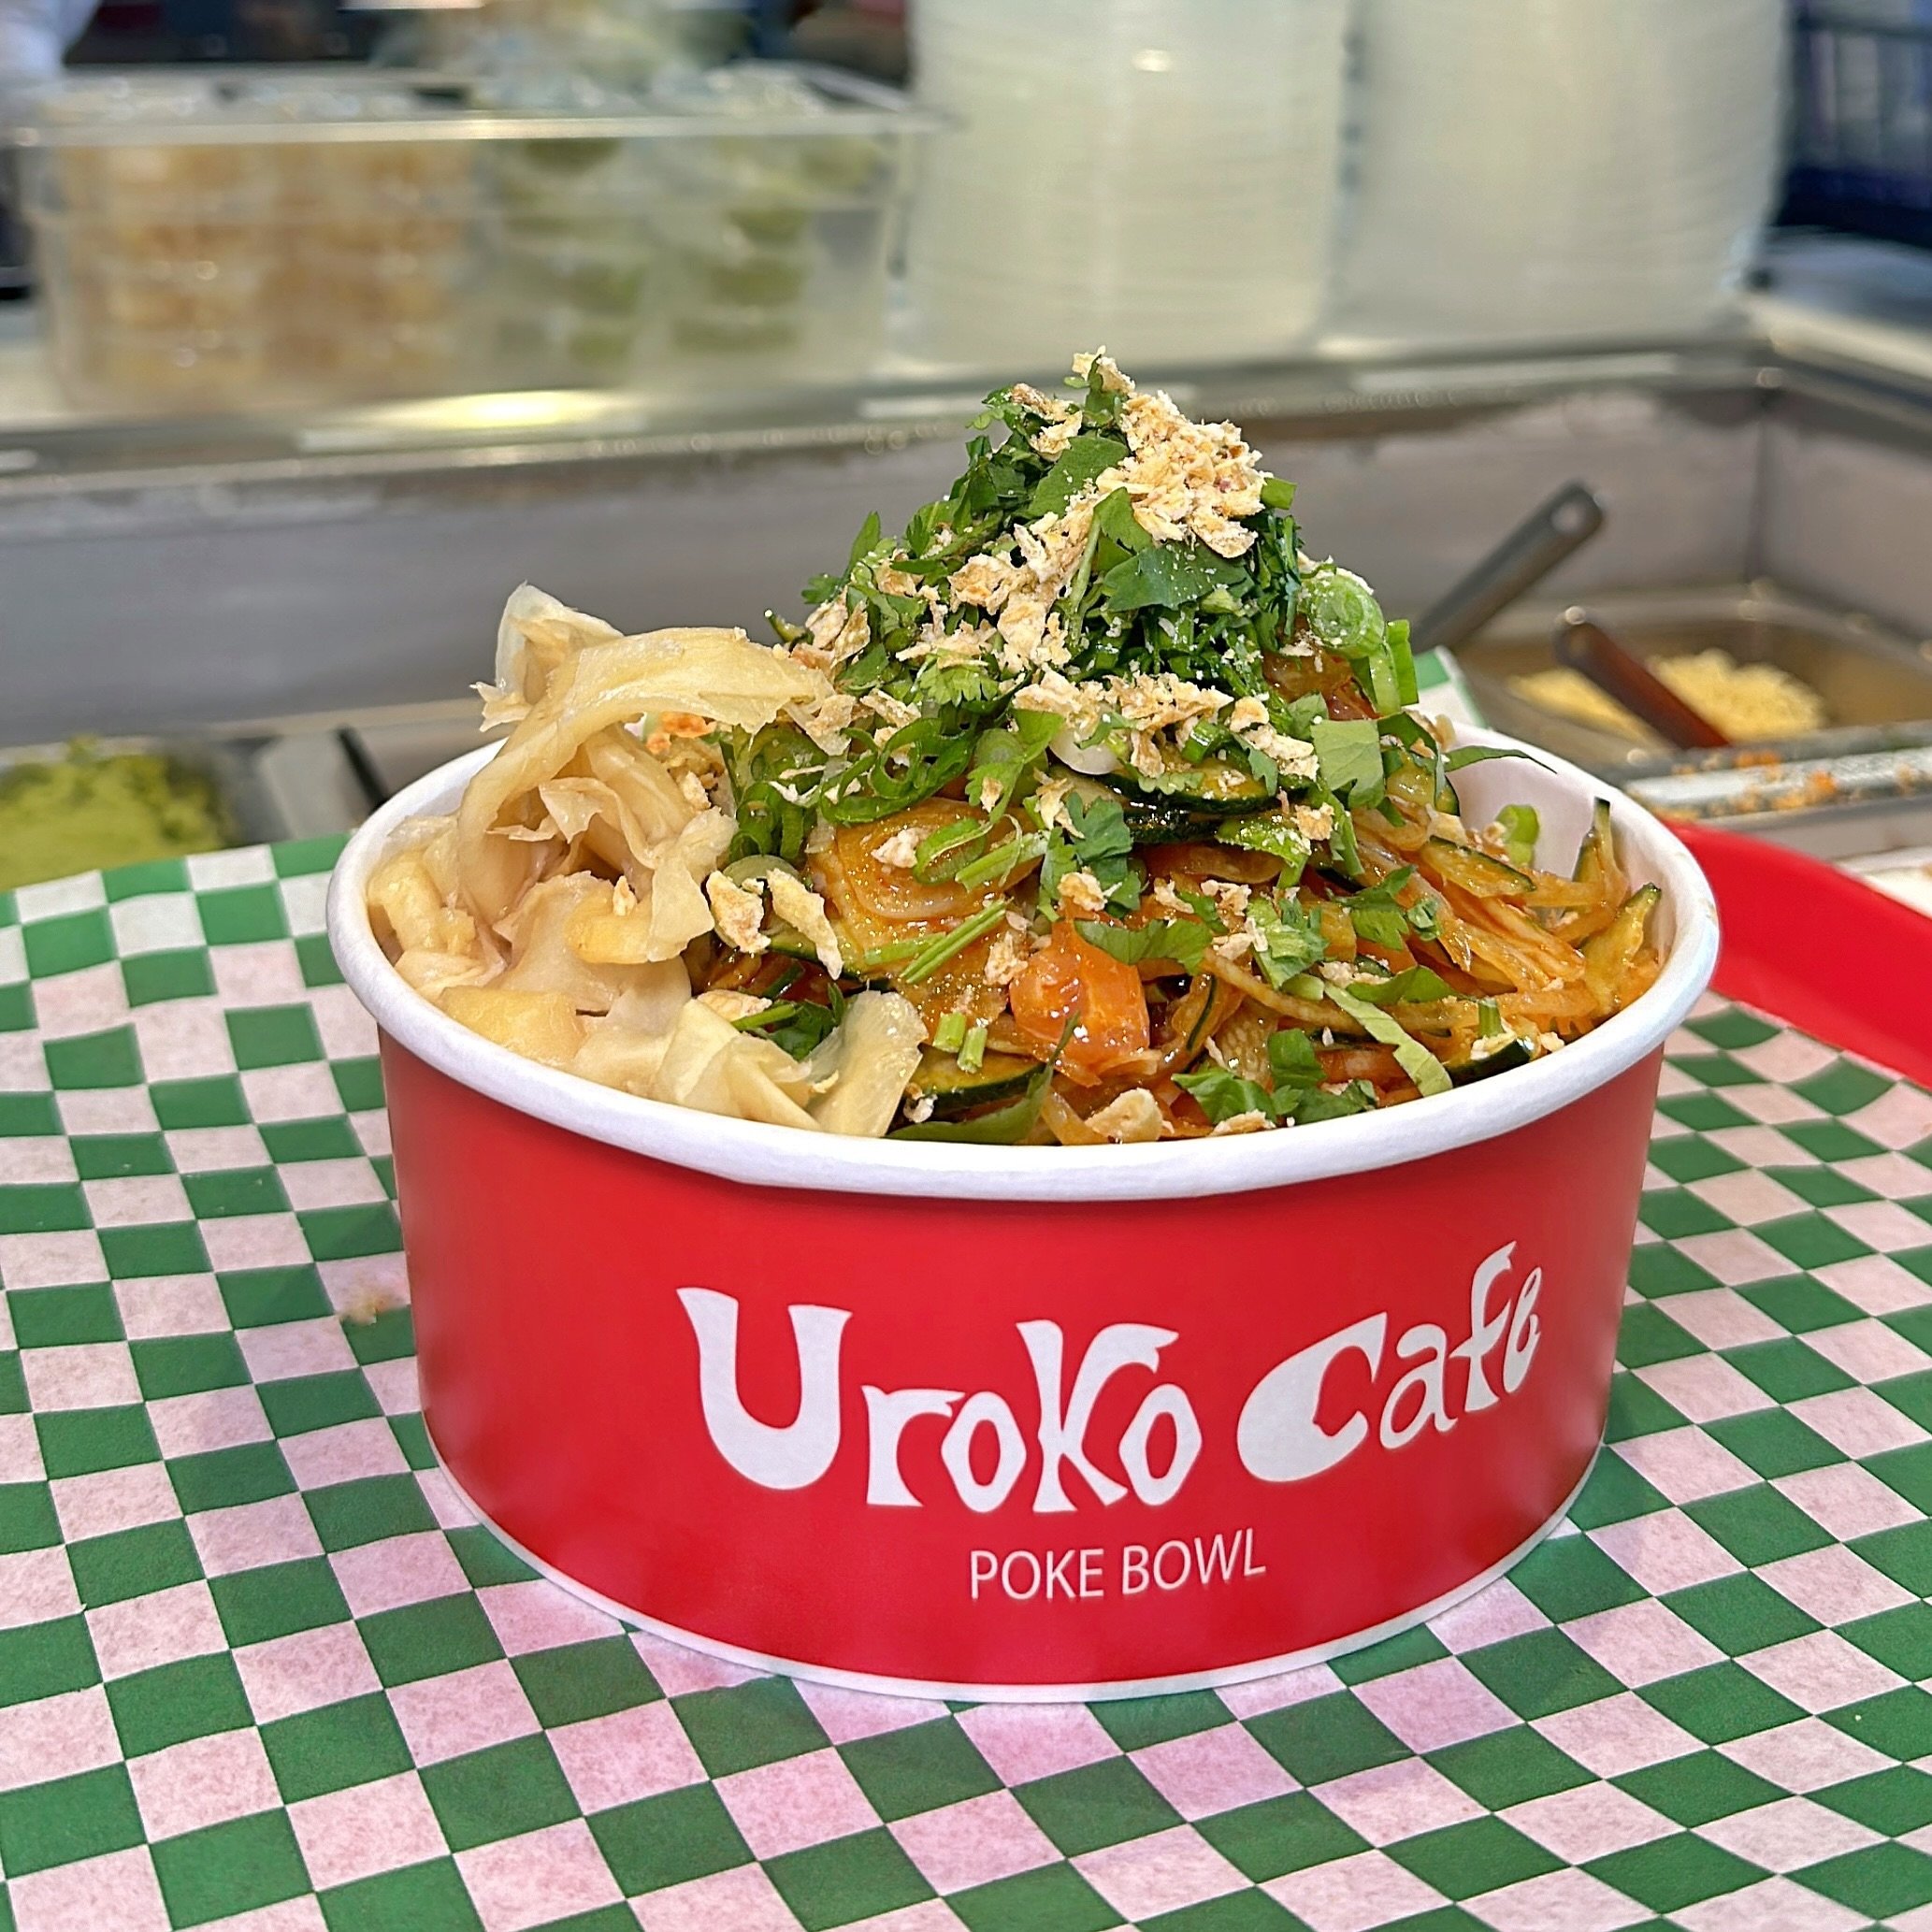 A magical combination of flavors in a colorful and healthy Poke Bowl 🙌🧡

Create your OWN!

👏 The Best California Style Poke Bowl in OC
📍Costa Mesa 
📍Cypress
&bull;
#urokocafe #mekarauroko #freshandhealthy #healthylunch #pokelovers #sushilovers #